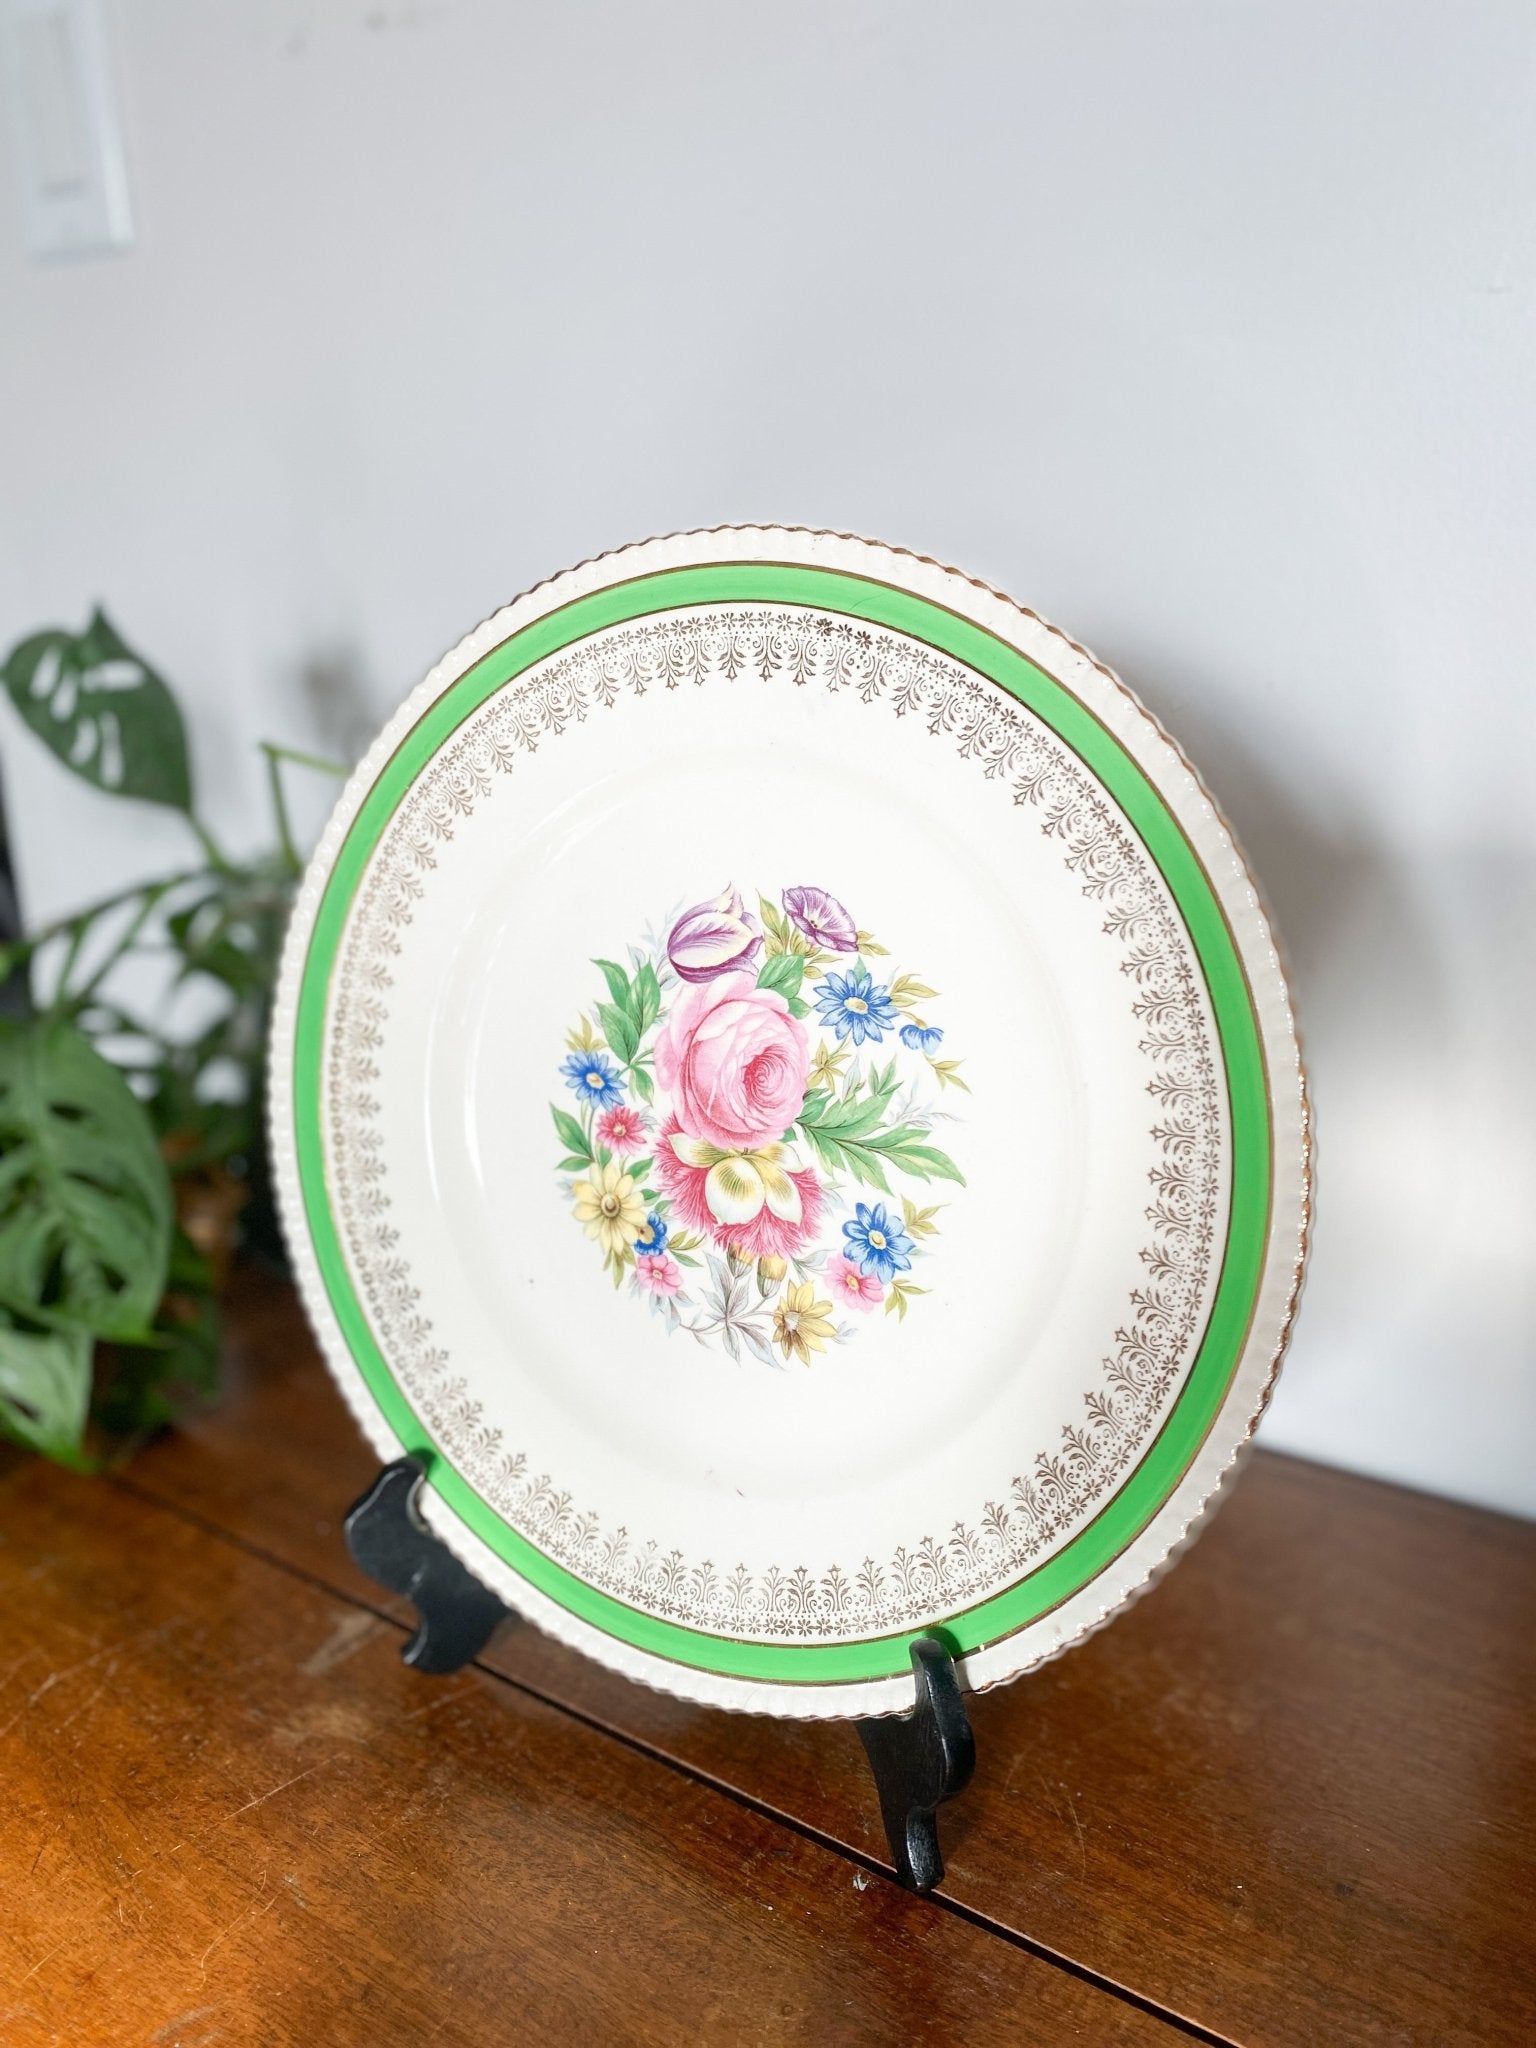 Solianware Simpsons Pottery - Green & Rose Plate with 22K Gold Filigre - Perth Market